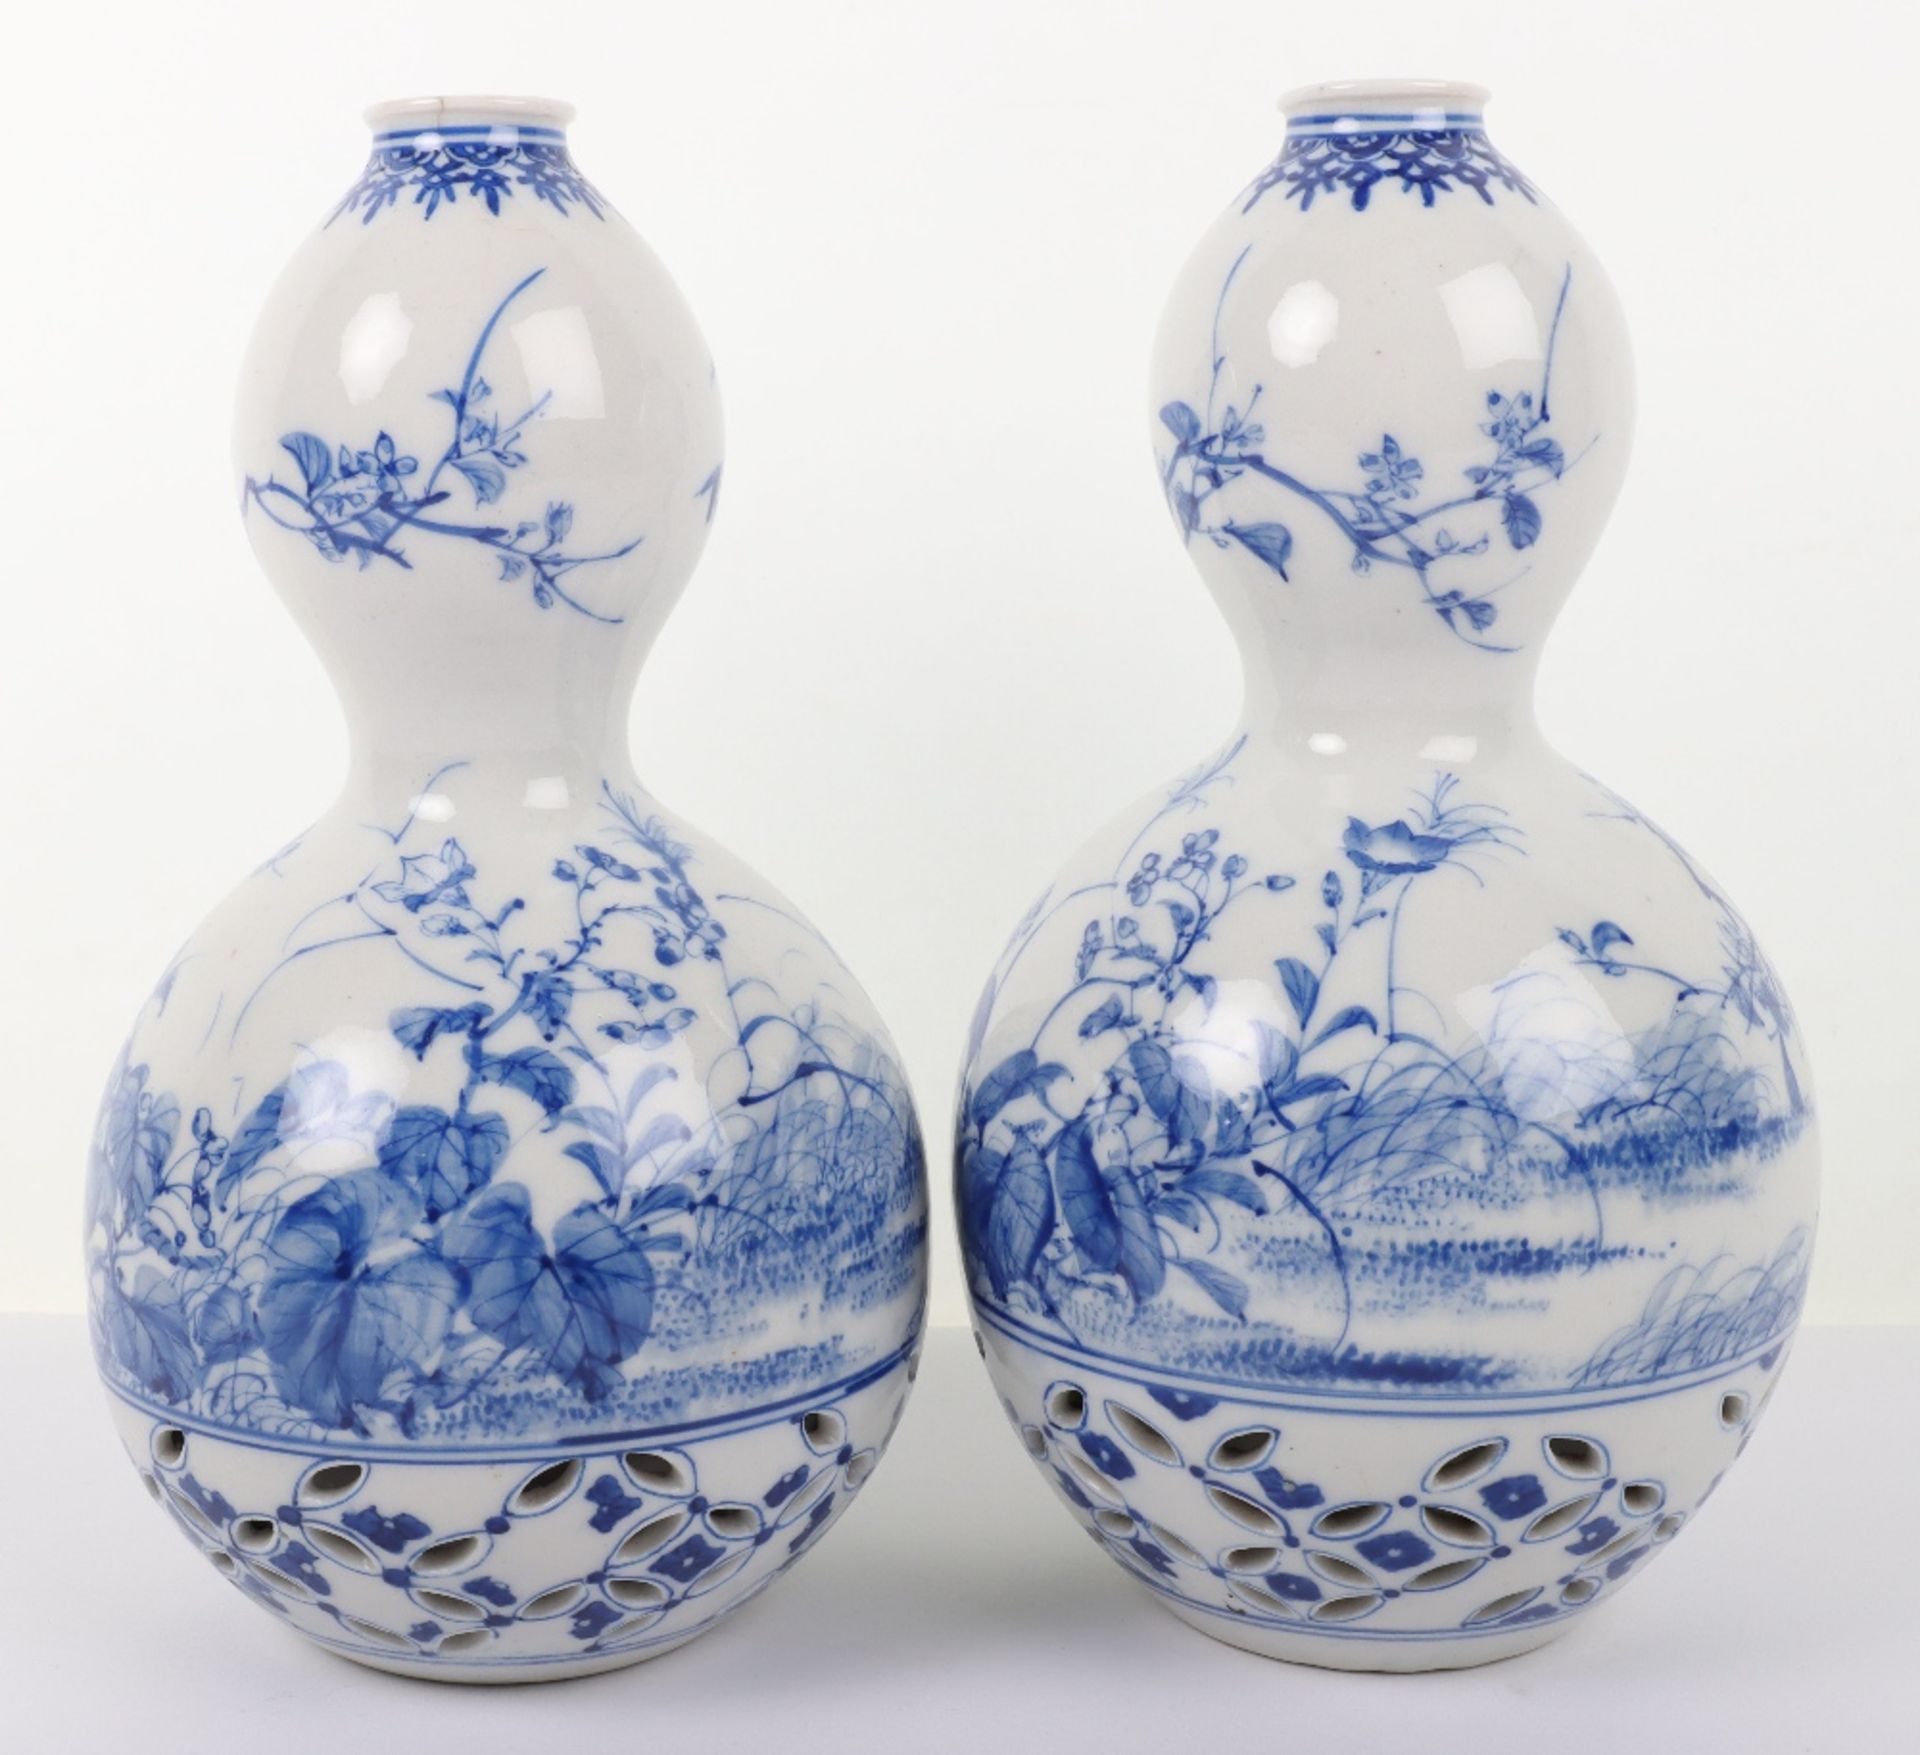 A pair of 20th century Japanese double gourd vases - Image 2 of 6